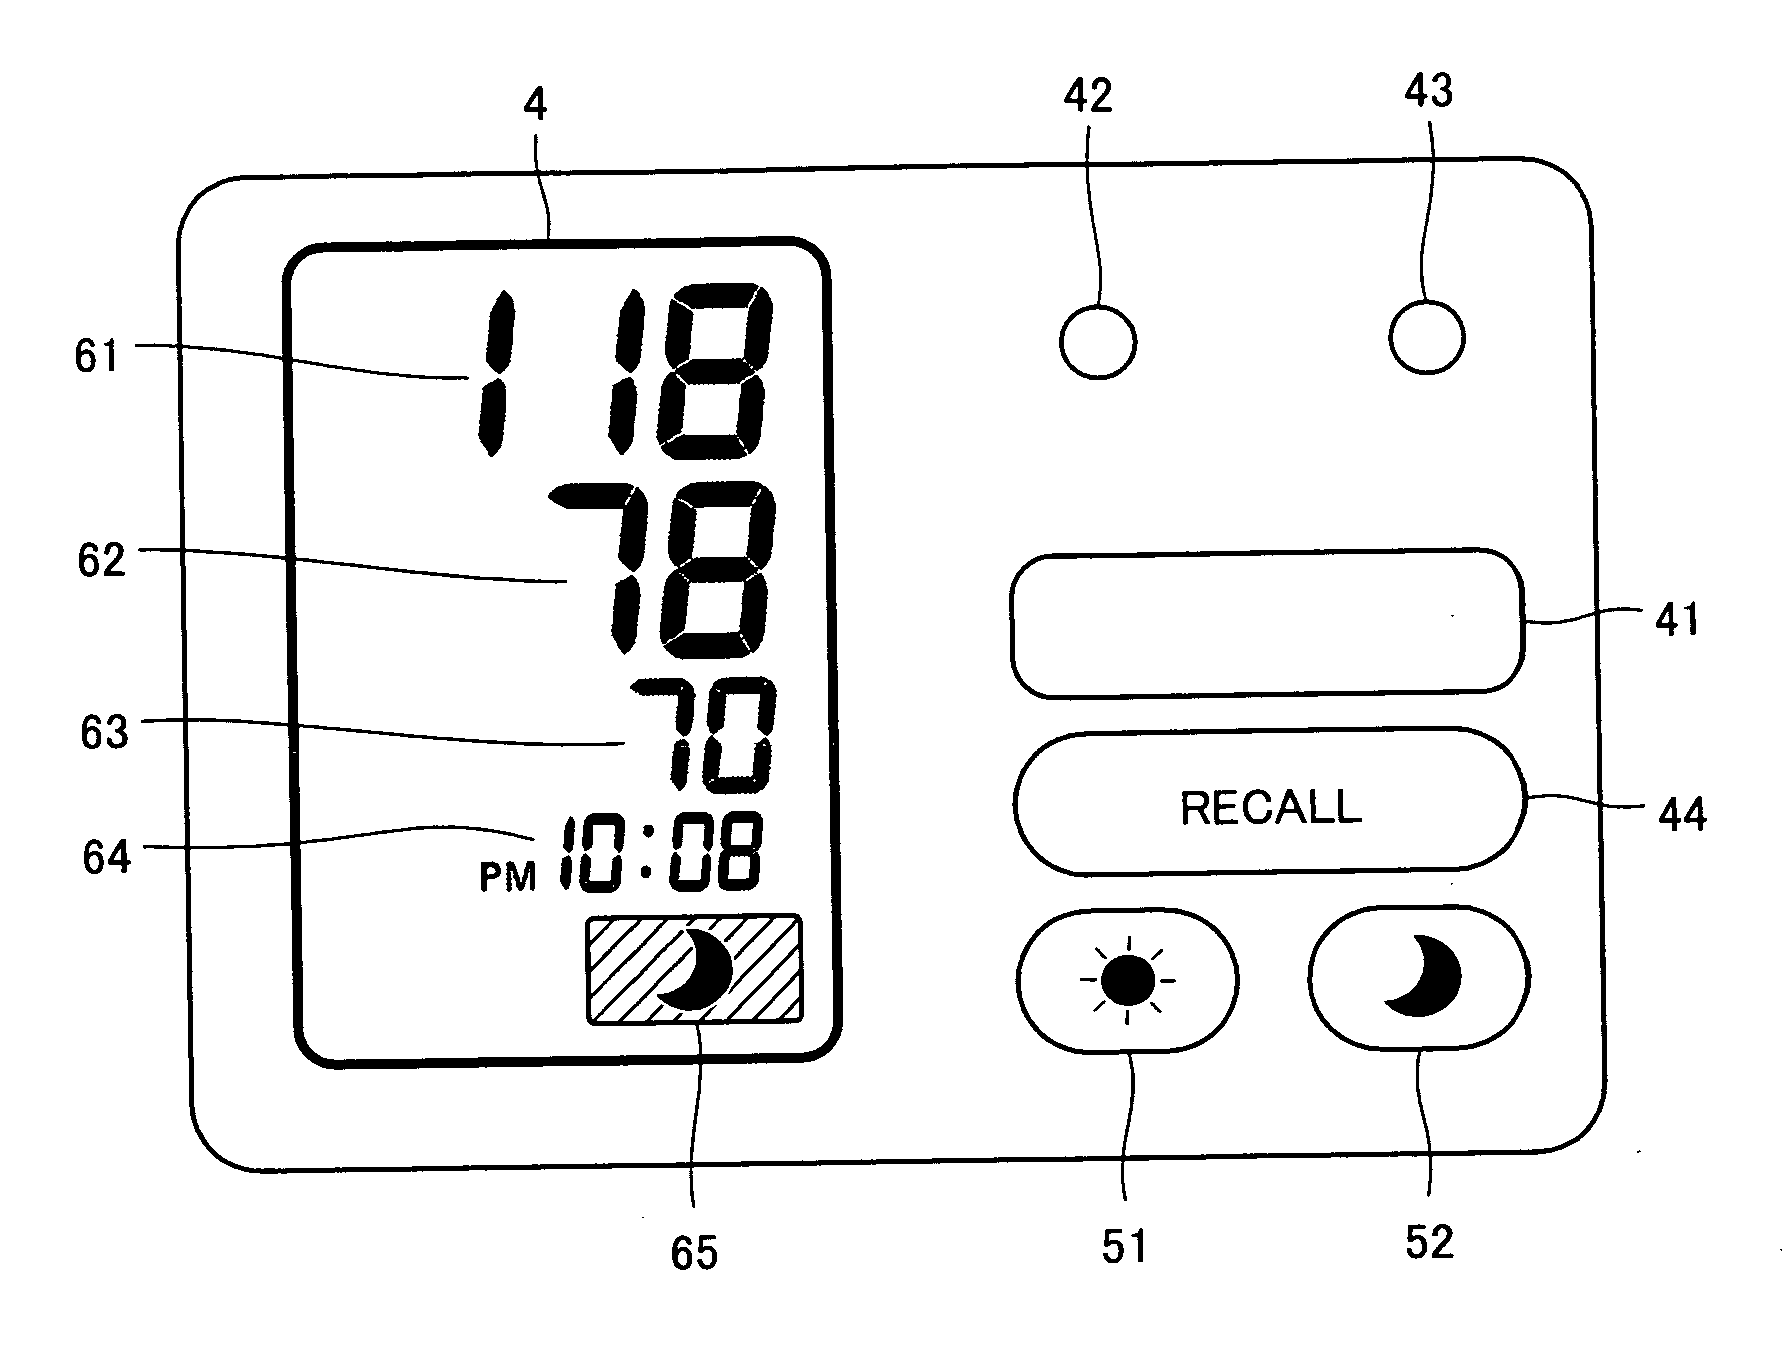 Electronic blood pressure monitor & data processing apparatus